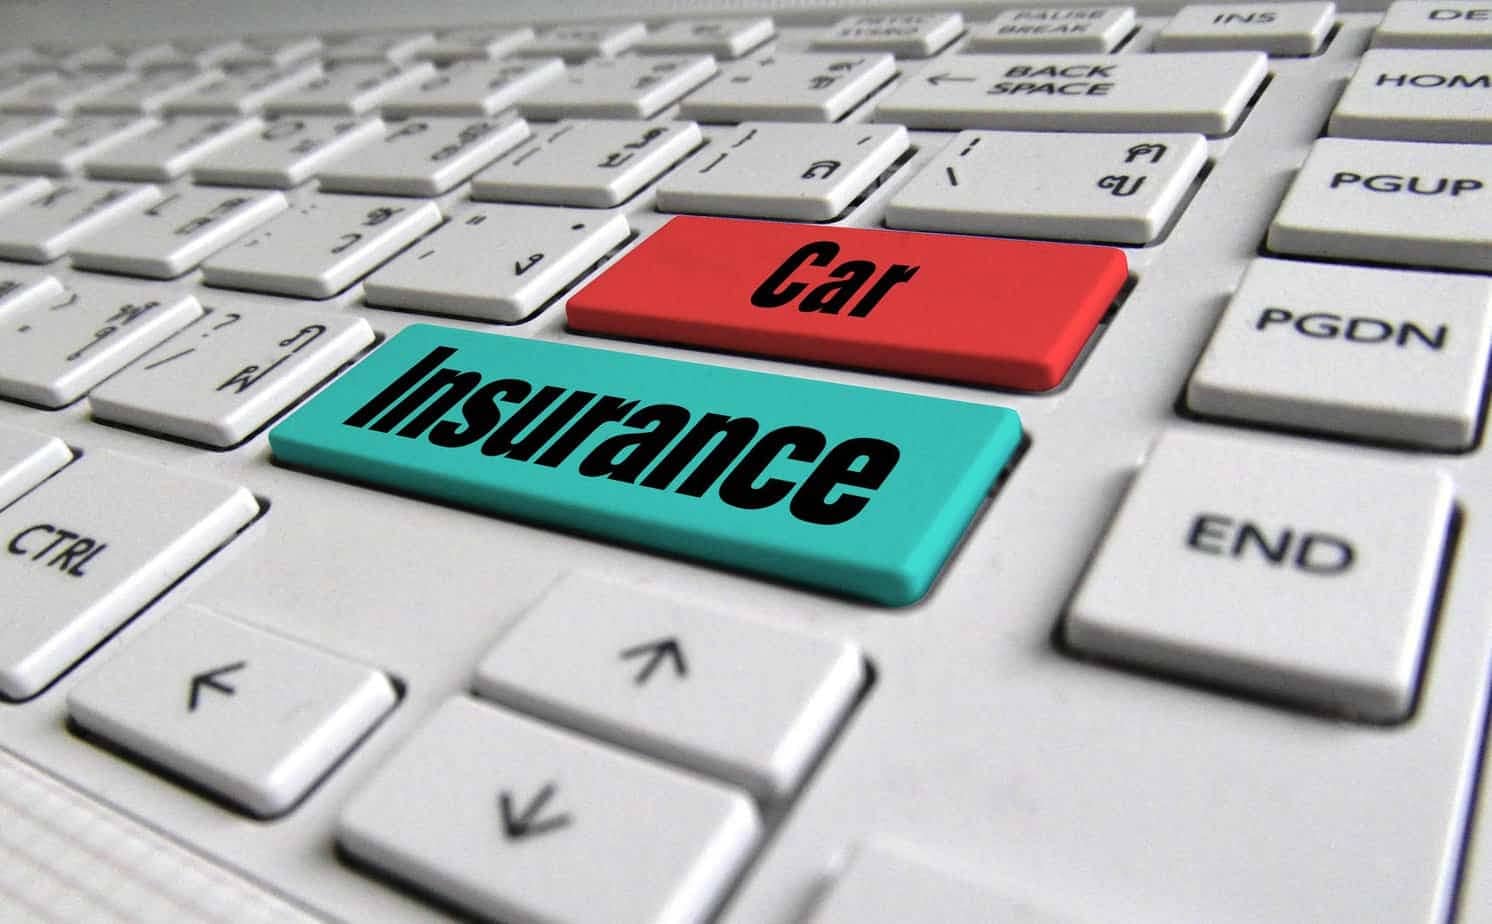 Why is Car Insurance So Expensive in South Carolina?